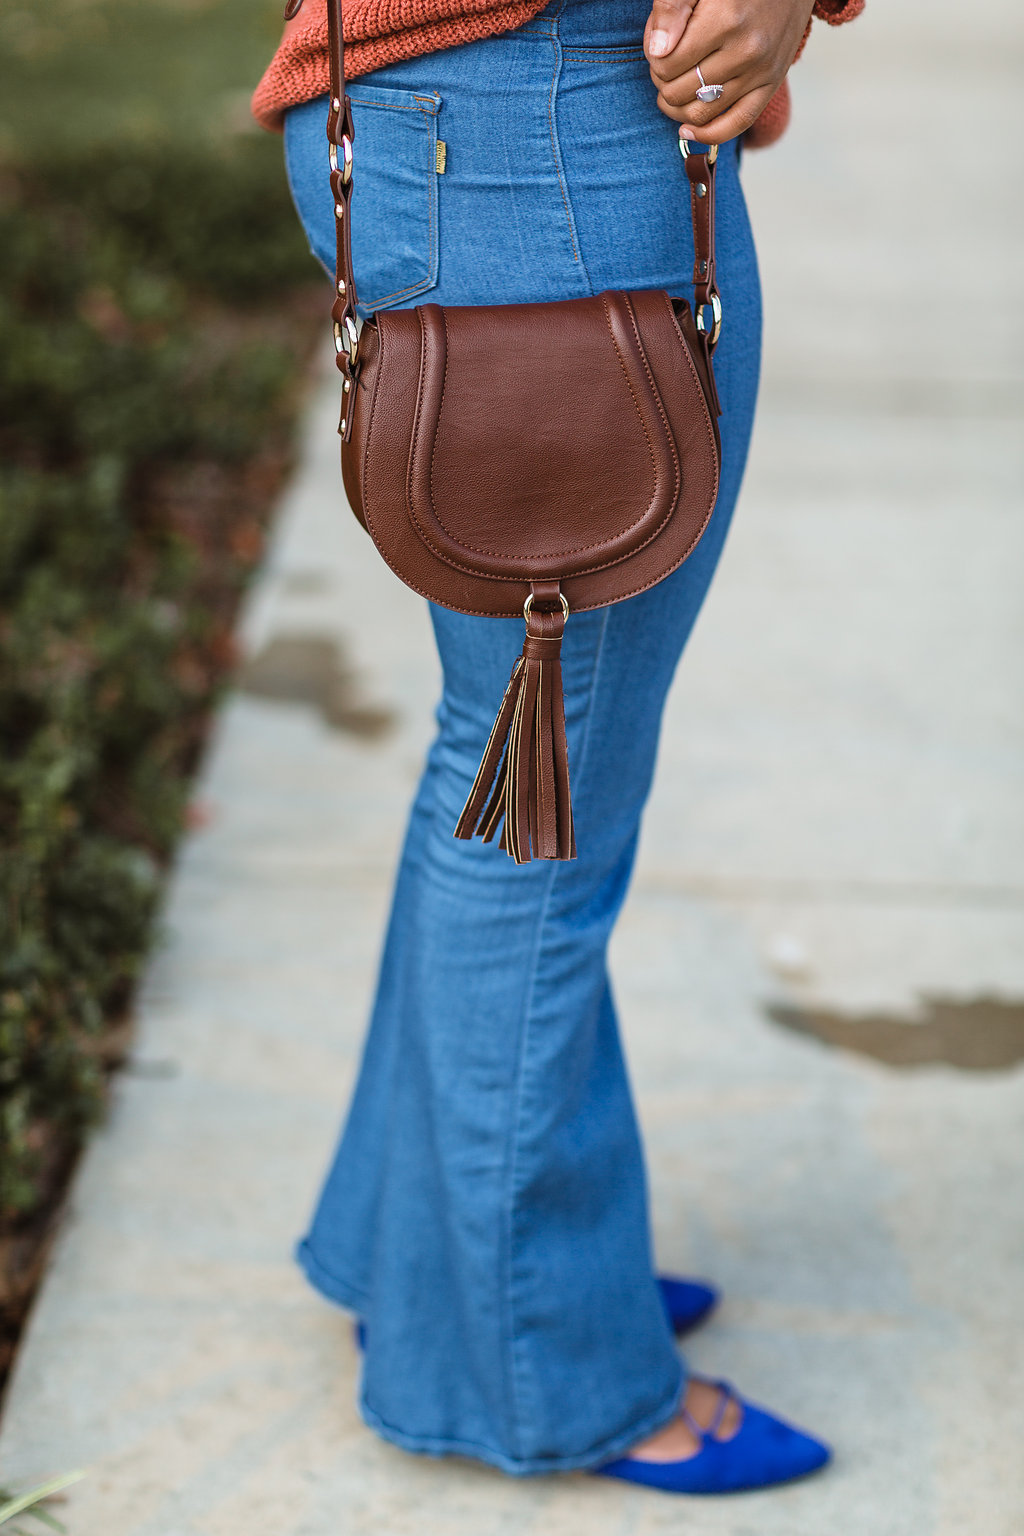 how to wear a saddle bag